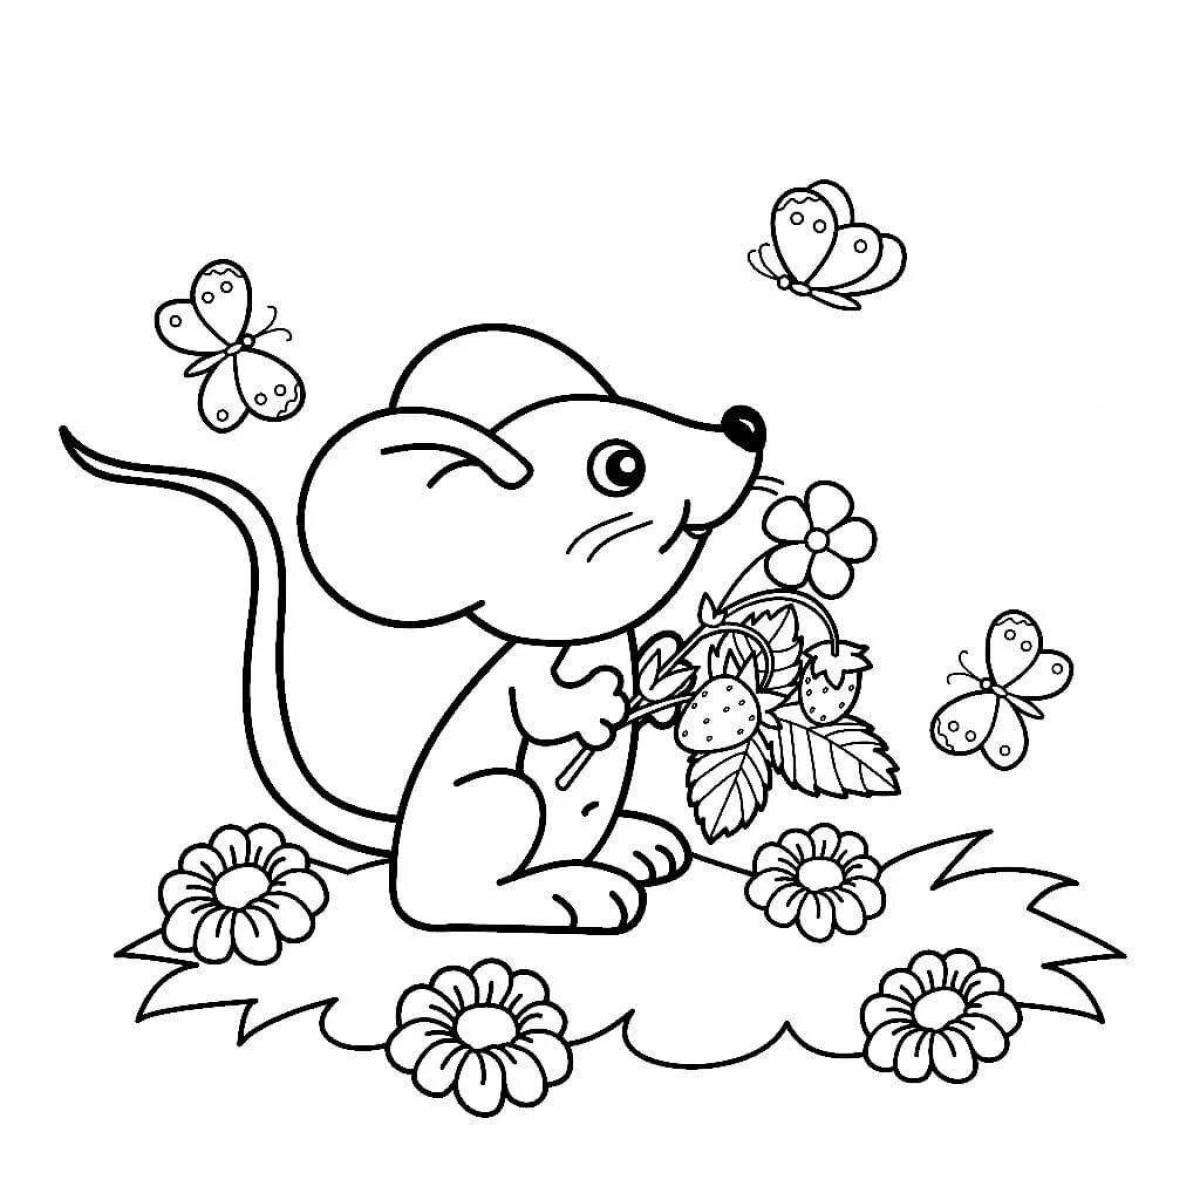 Blessed mouse and bear coloring page